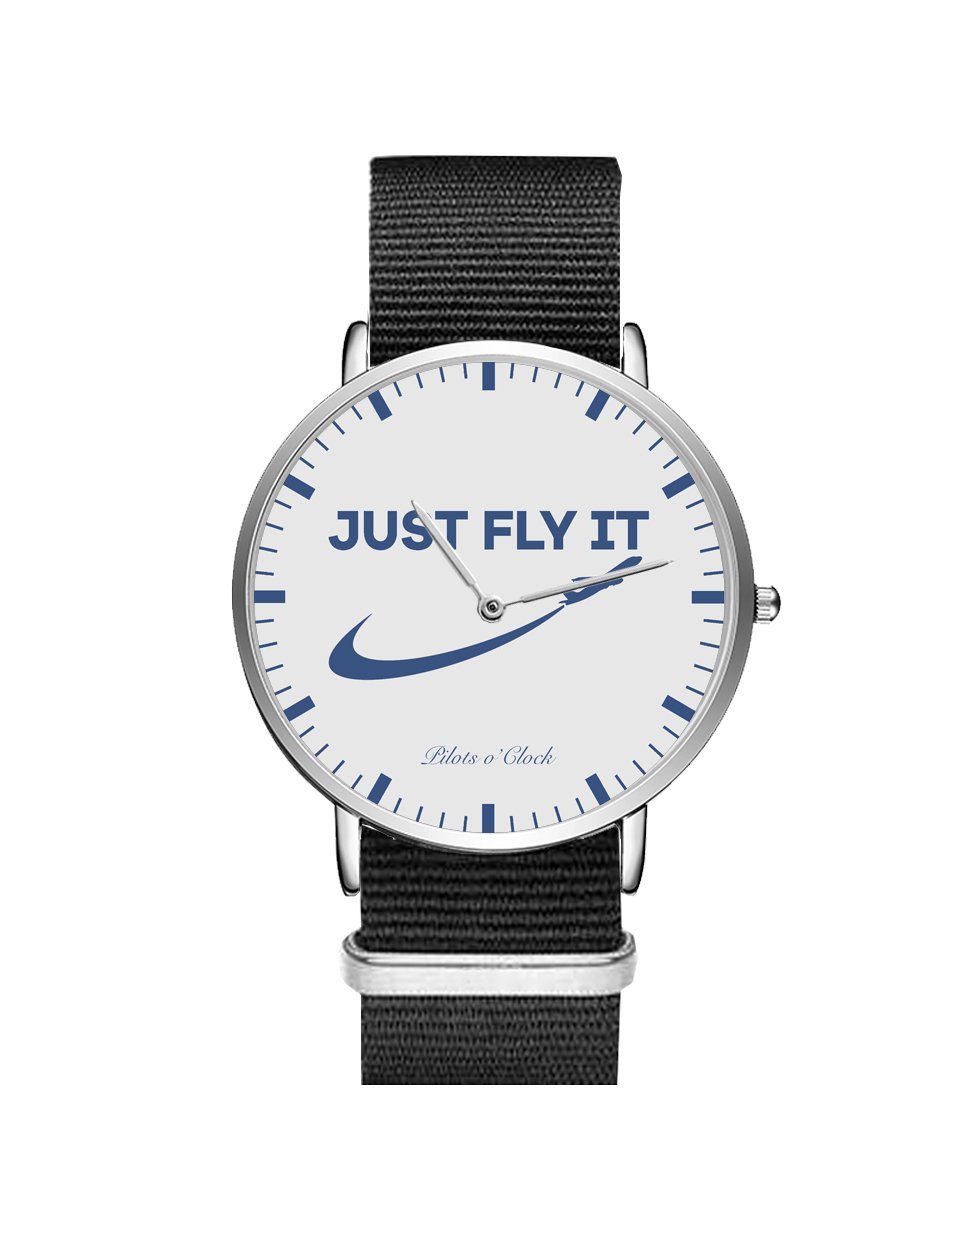 Just Fly It 2 Leather Strap Watches Pilot Eyes Store Silver & Black Nylon Strap 